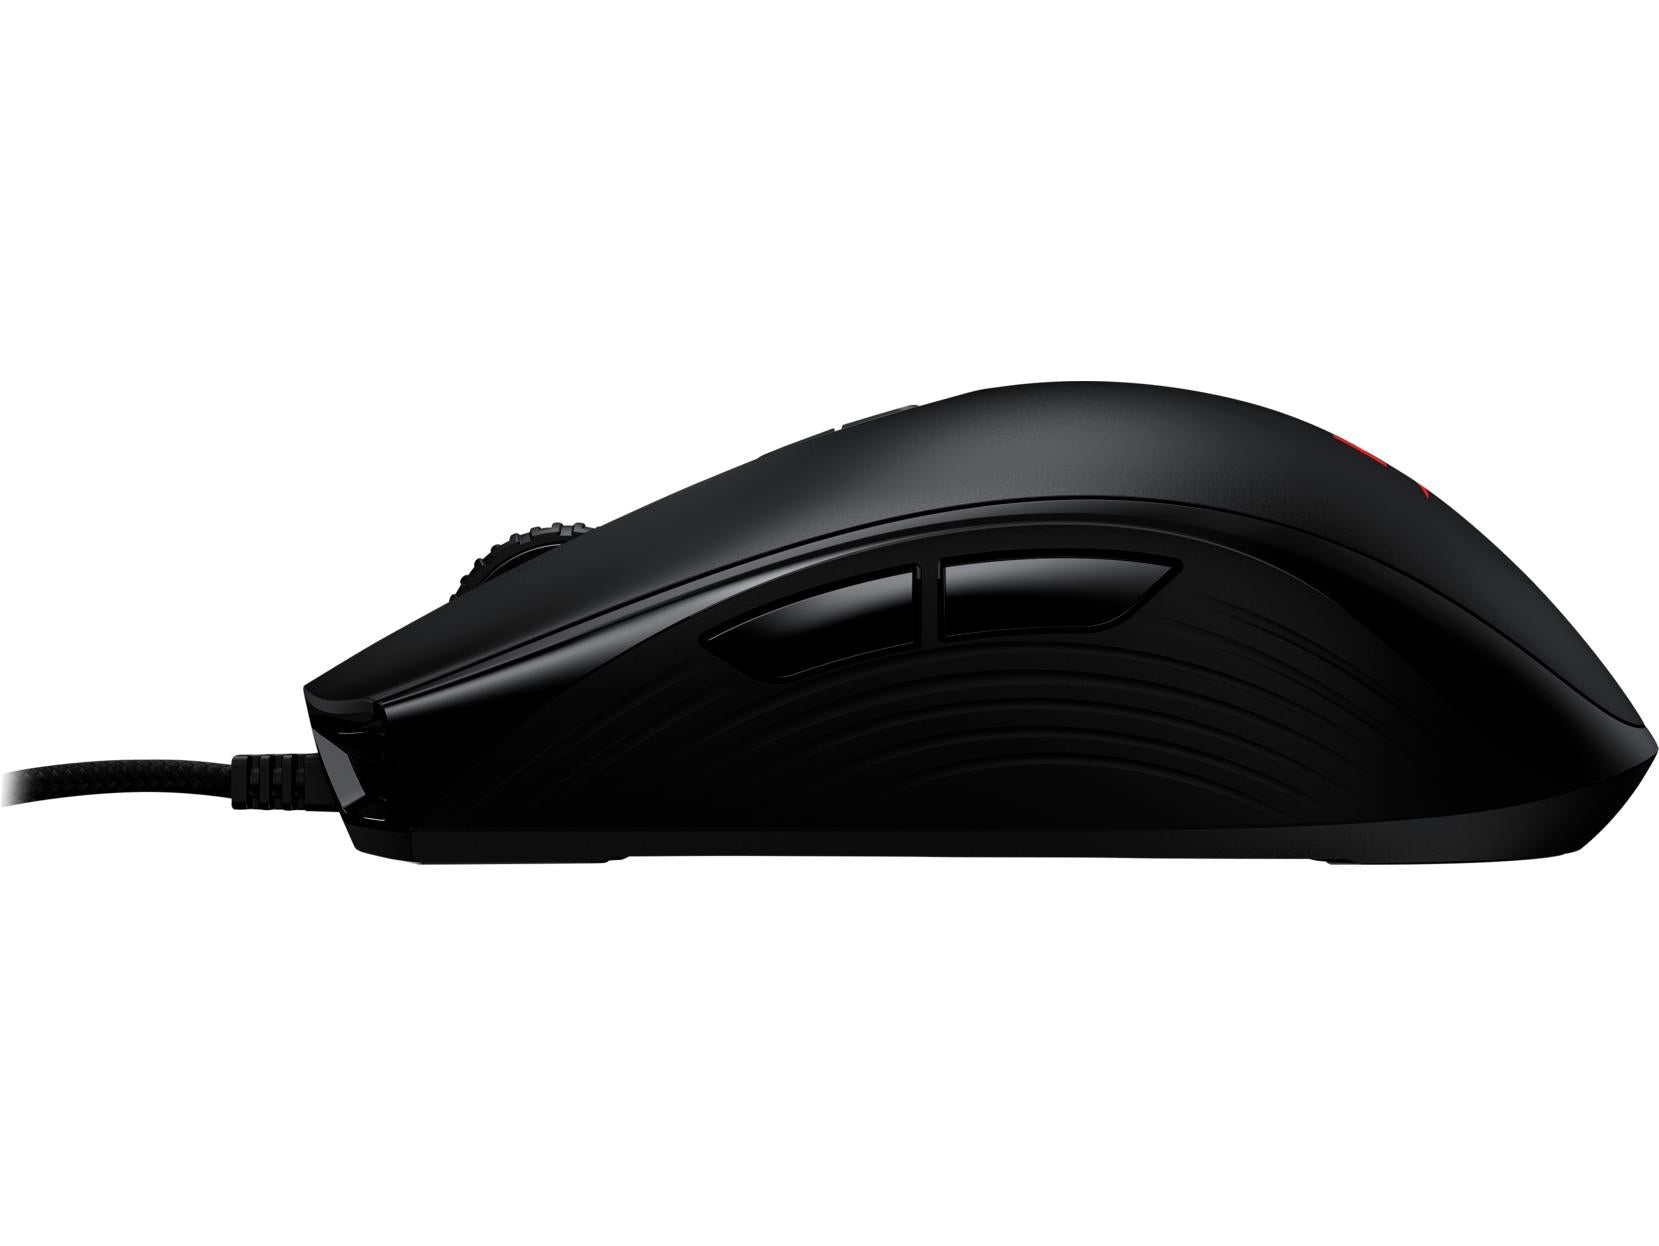 HP HYPERX PULSEFIRE CORE BLACK WIRED GAMING MOUSE-MOUSE-Makotek Computers